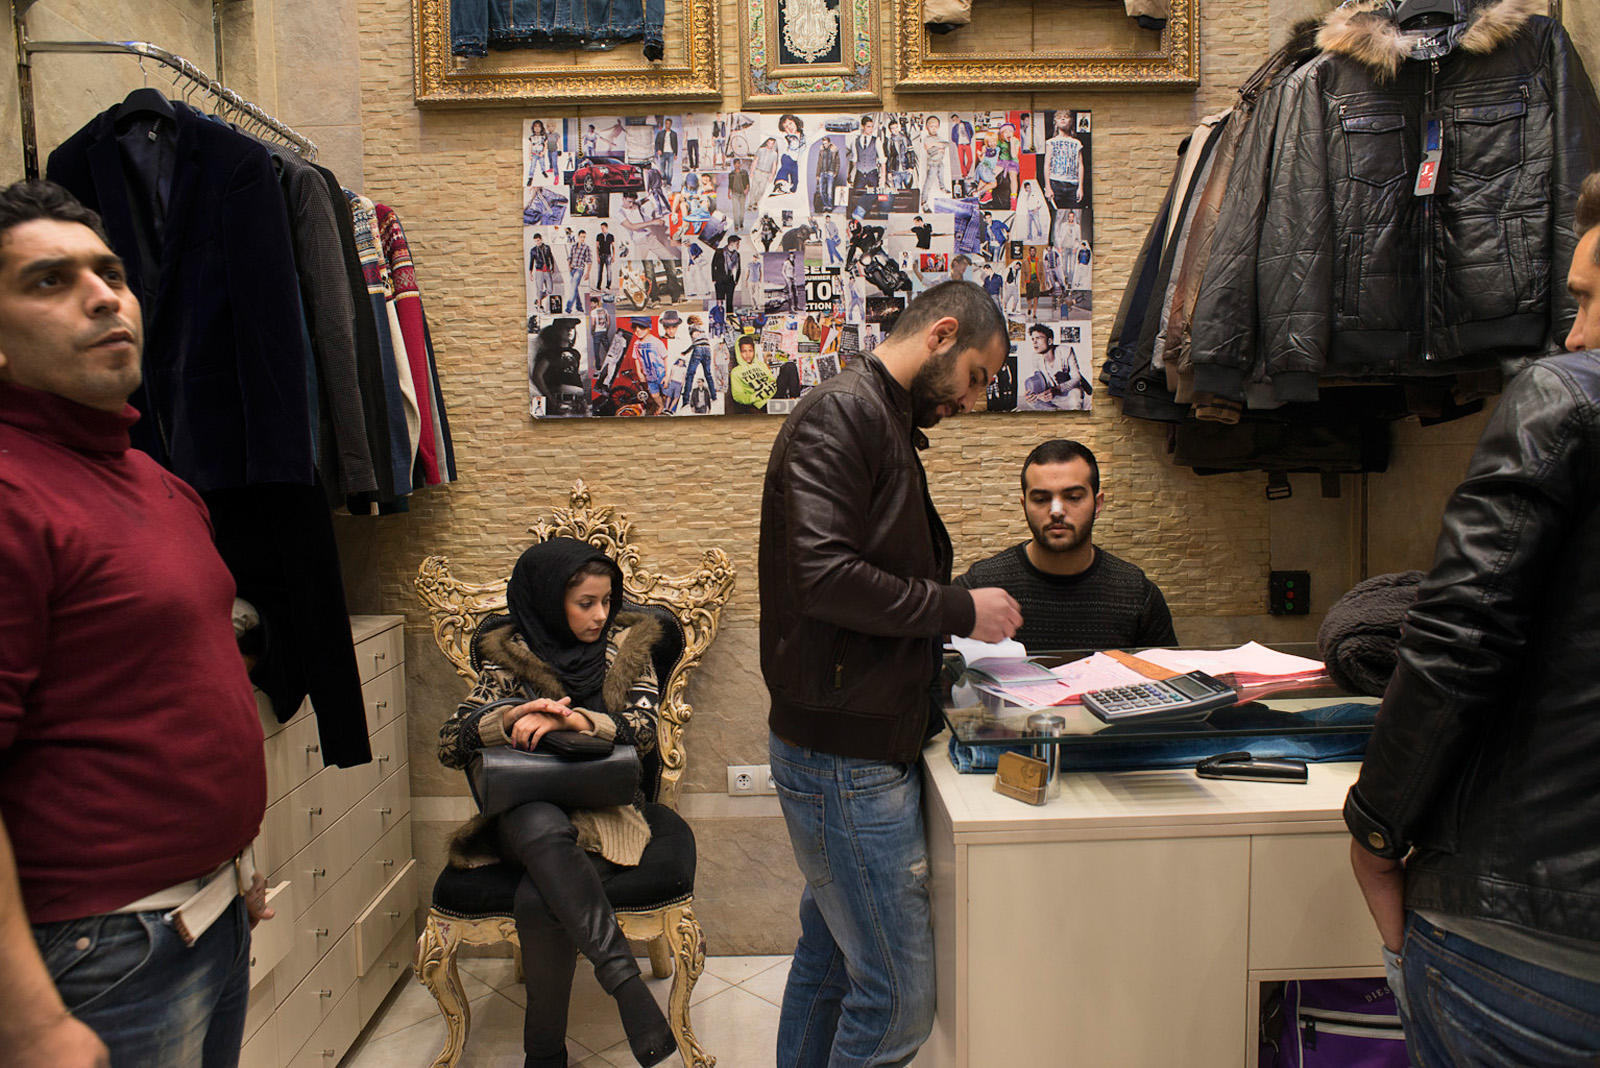 TEHRAN, IRAN | 2013-11-18 | At the Grand Bazar, a clothing store sells fashion and clothing imported from Turkey, which has got more difficult and more expensive, making it hard to compete with locally made fashion goods.